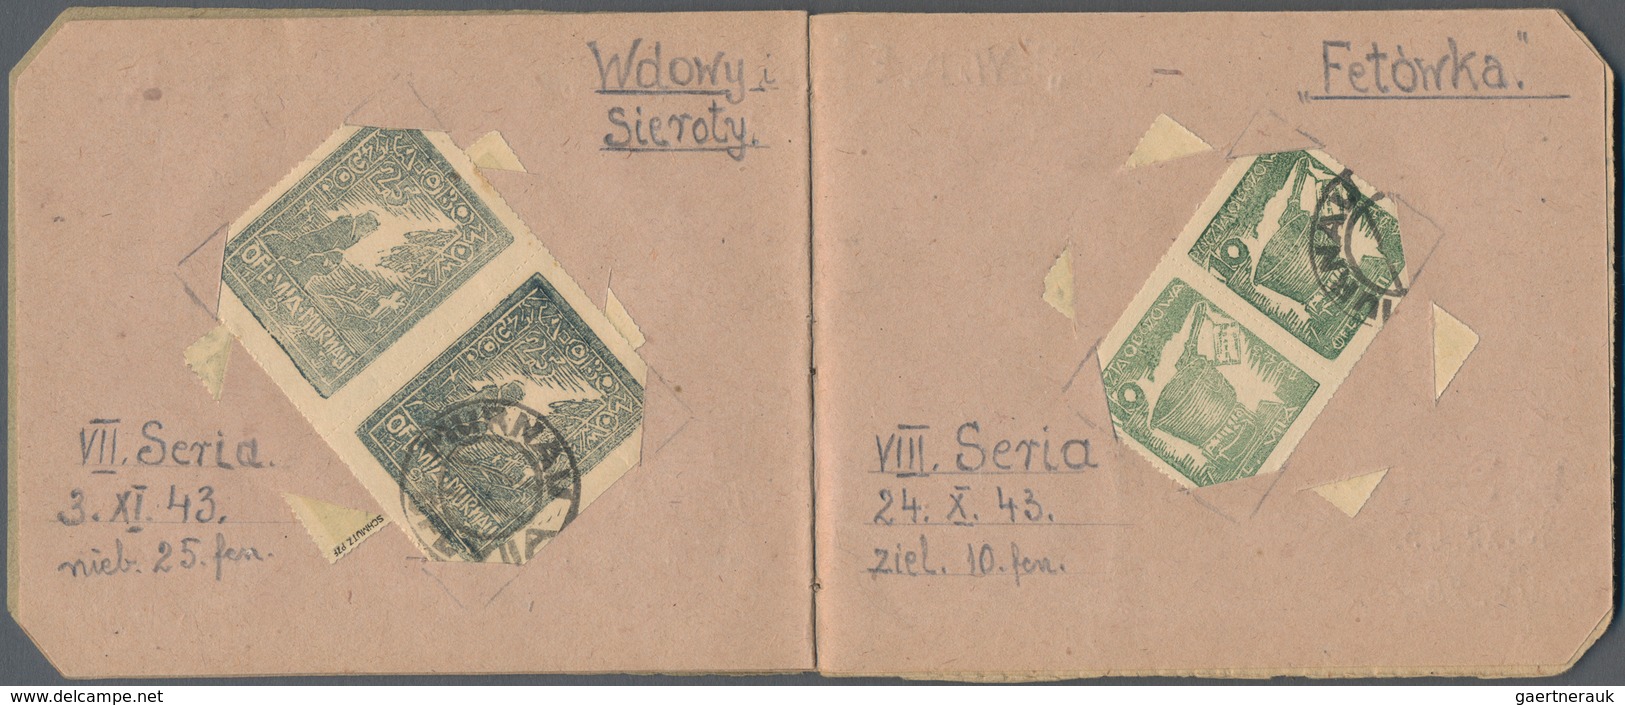 01578 Polen - Lagerpost: Murnau: 1945: Stamp booklet of the Polish Post in the OFLAG Murnau, 18 pages with